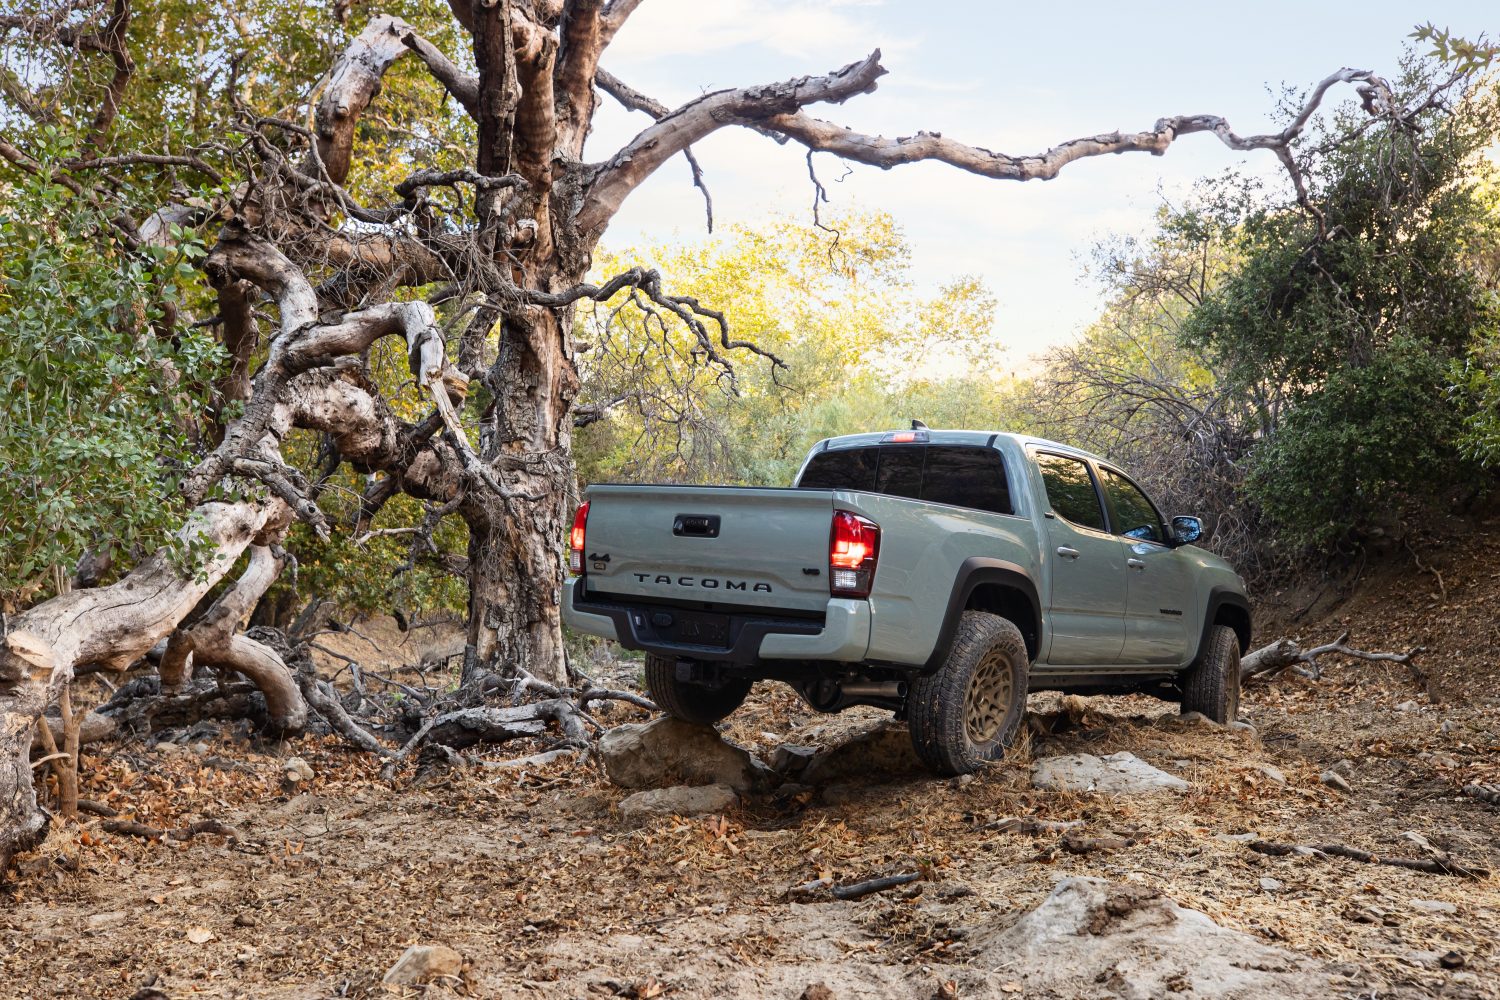 Gray 2022 Toyota Tacoma navigating an off-road trail.